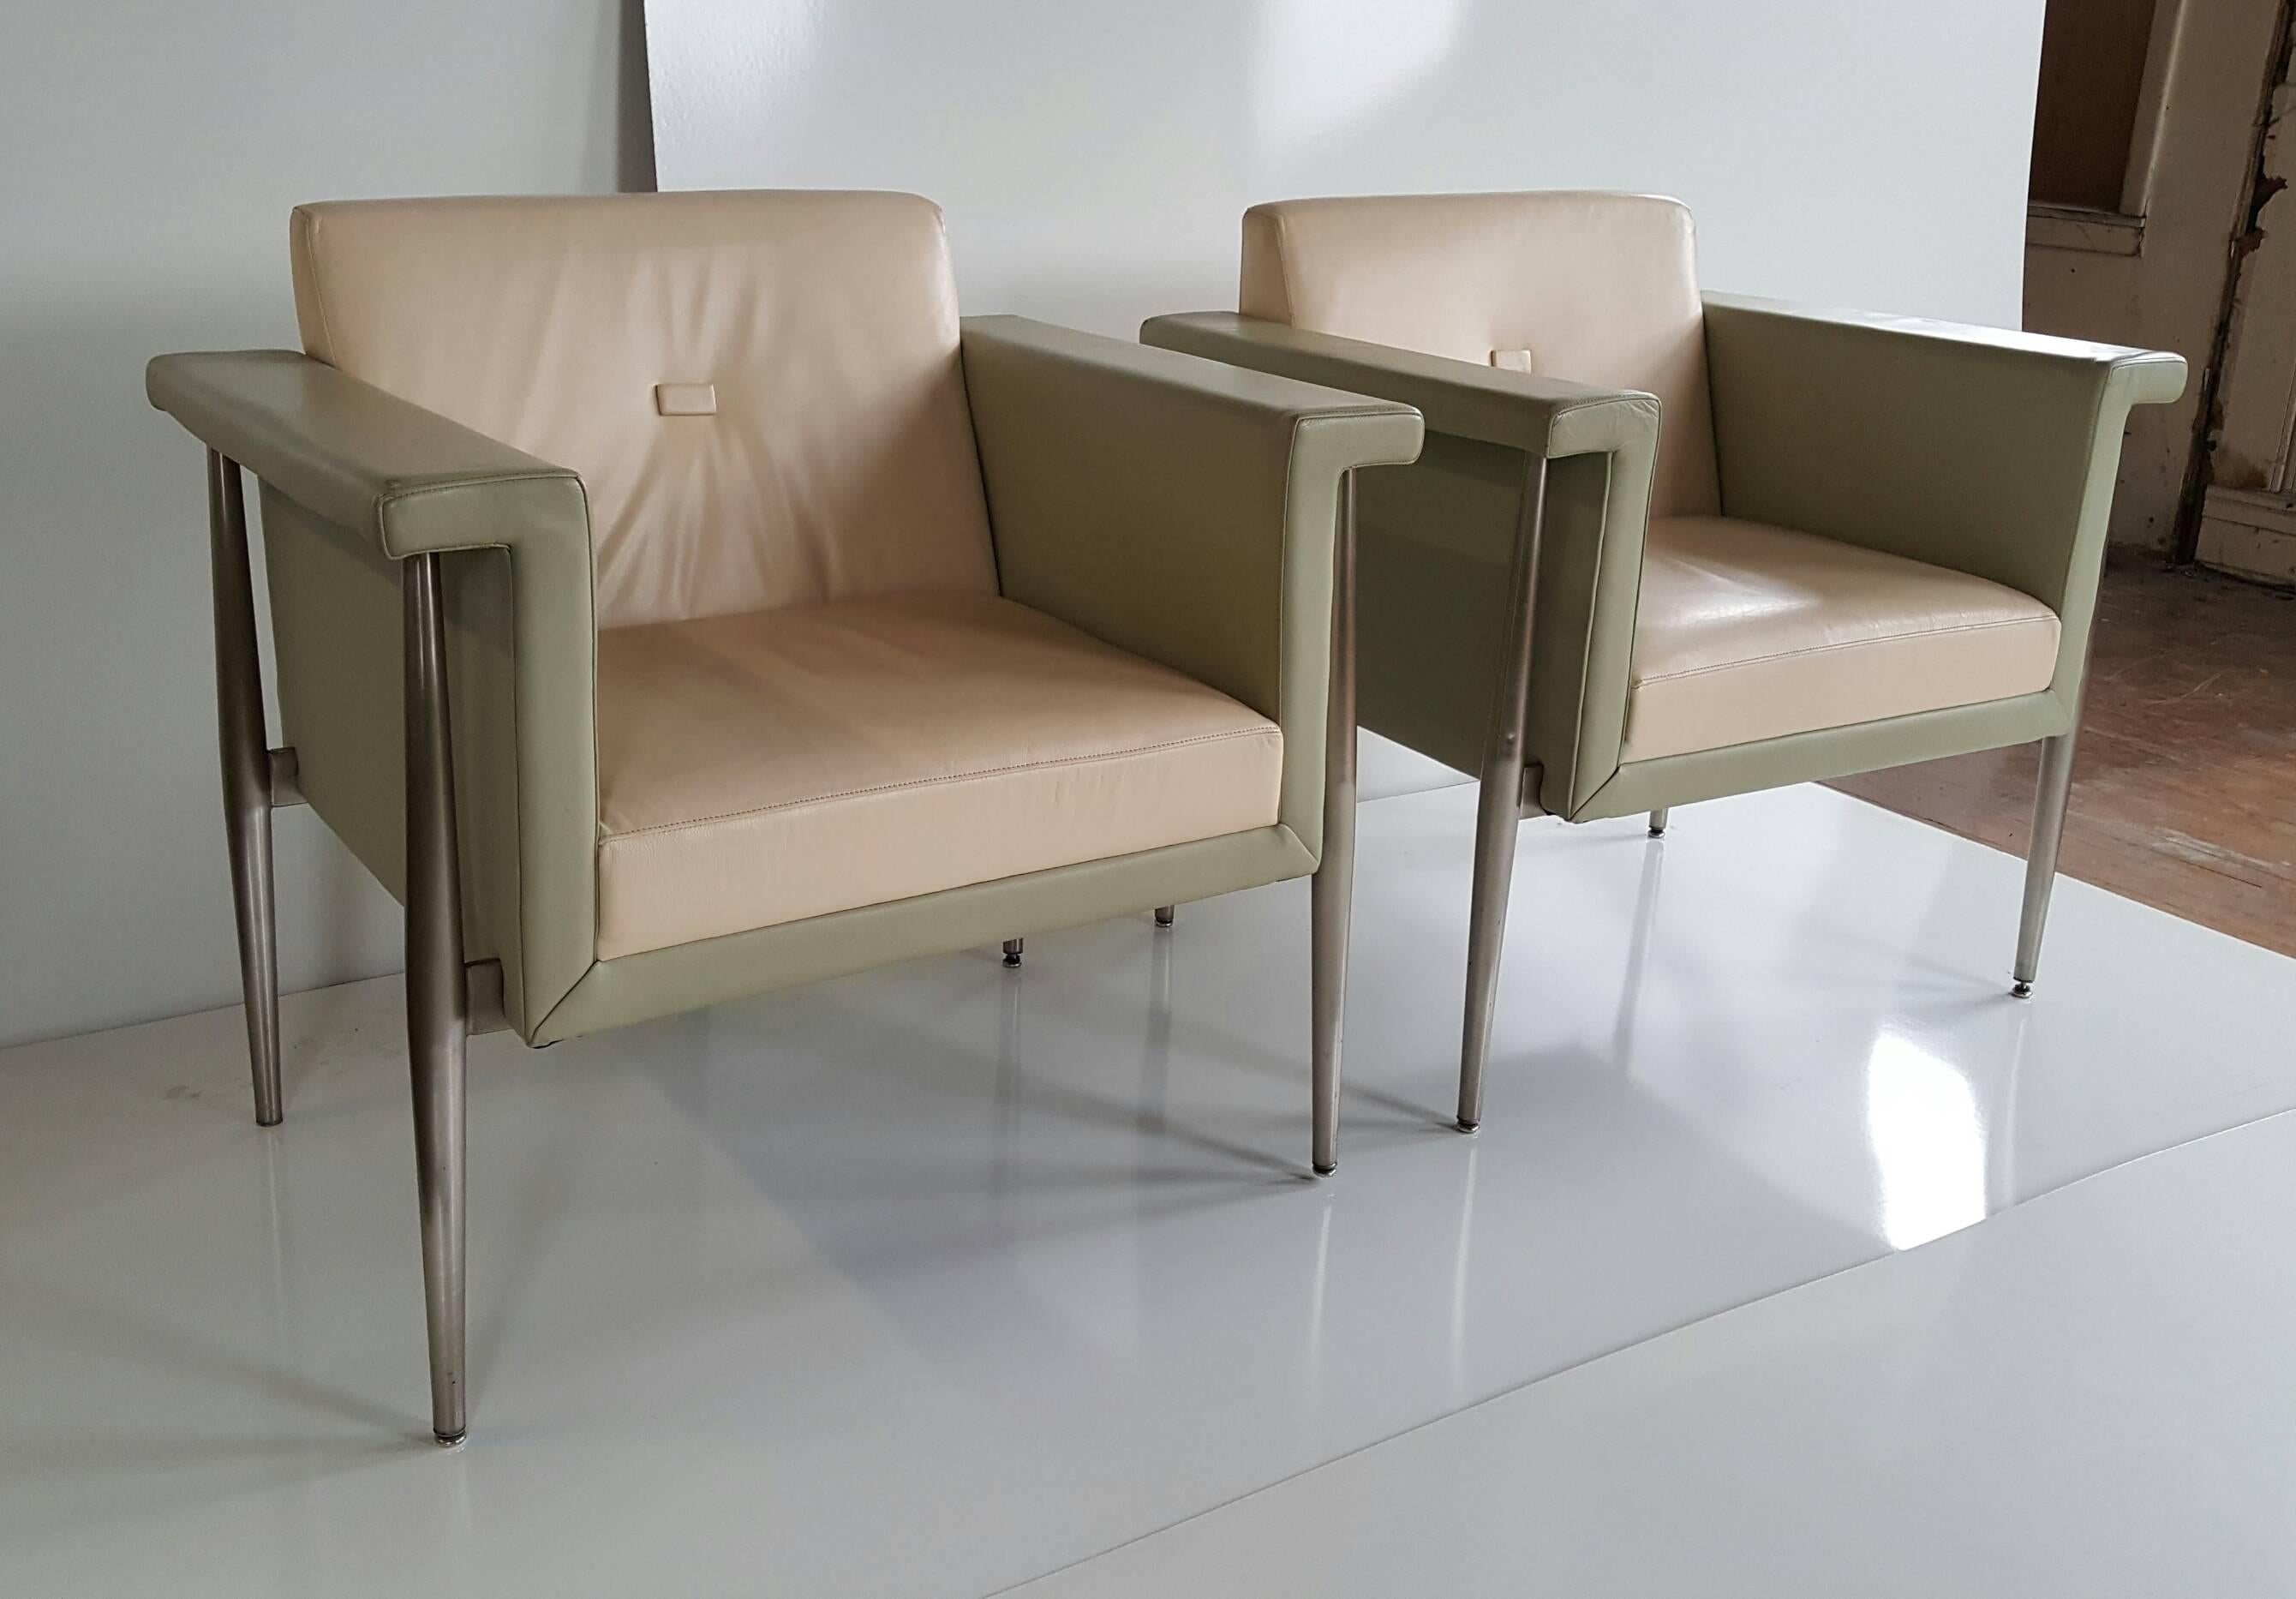 Sleek, elegant pair of modernist. Memphis style lounge chairs manufactured by Berhardt Furniture, U.S.A. Quality soft, supple leather, soothing colors extruded aluminum frames.